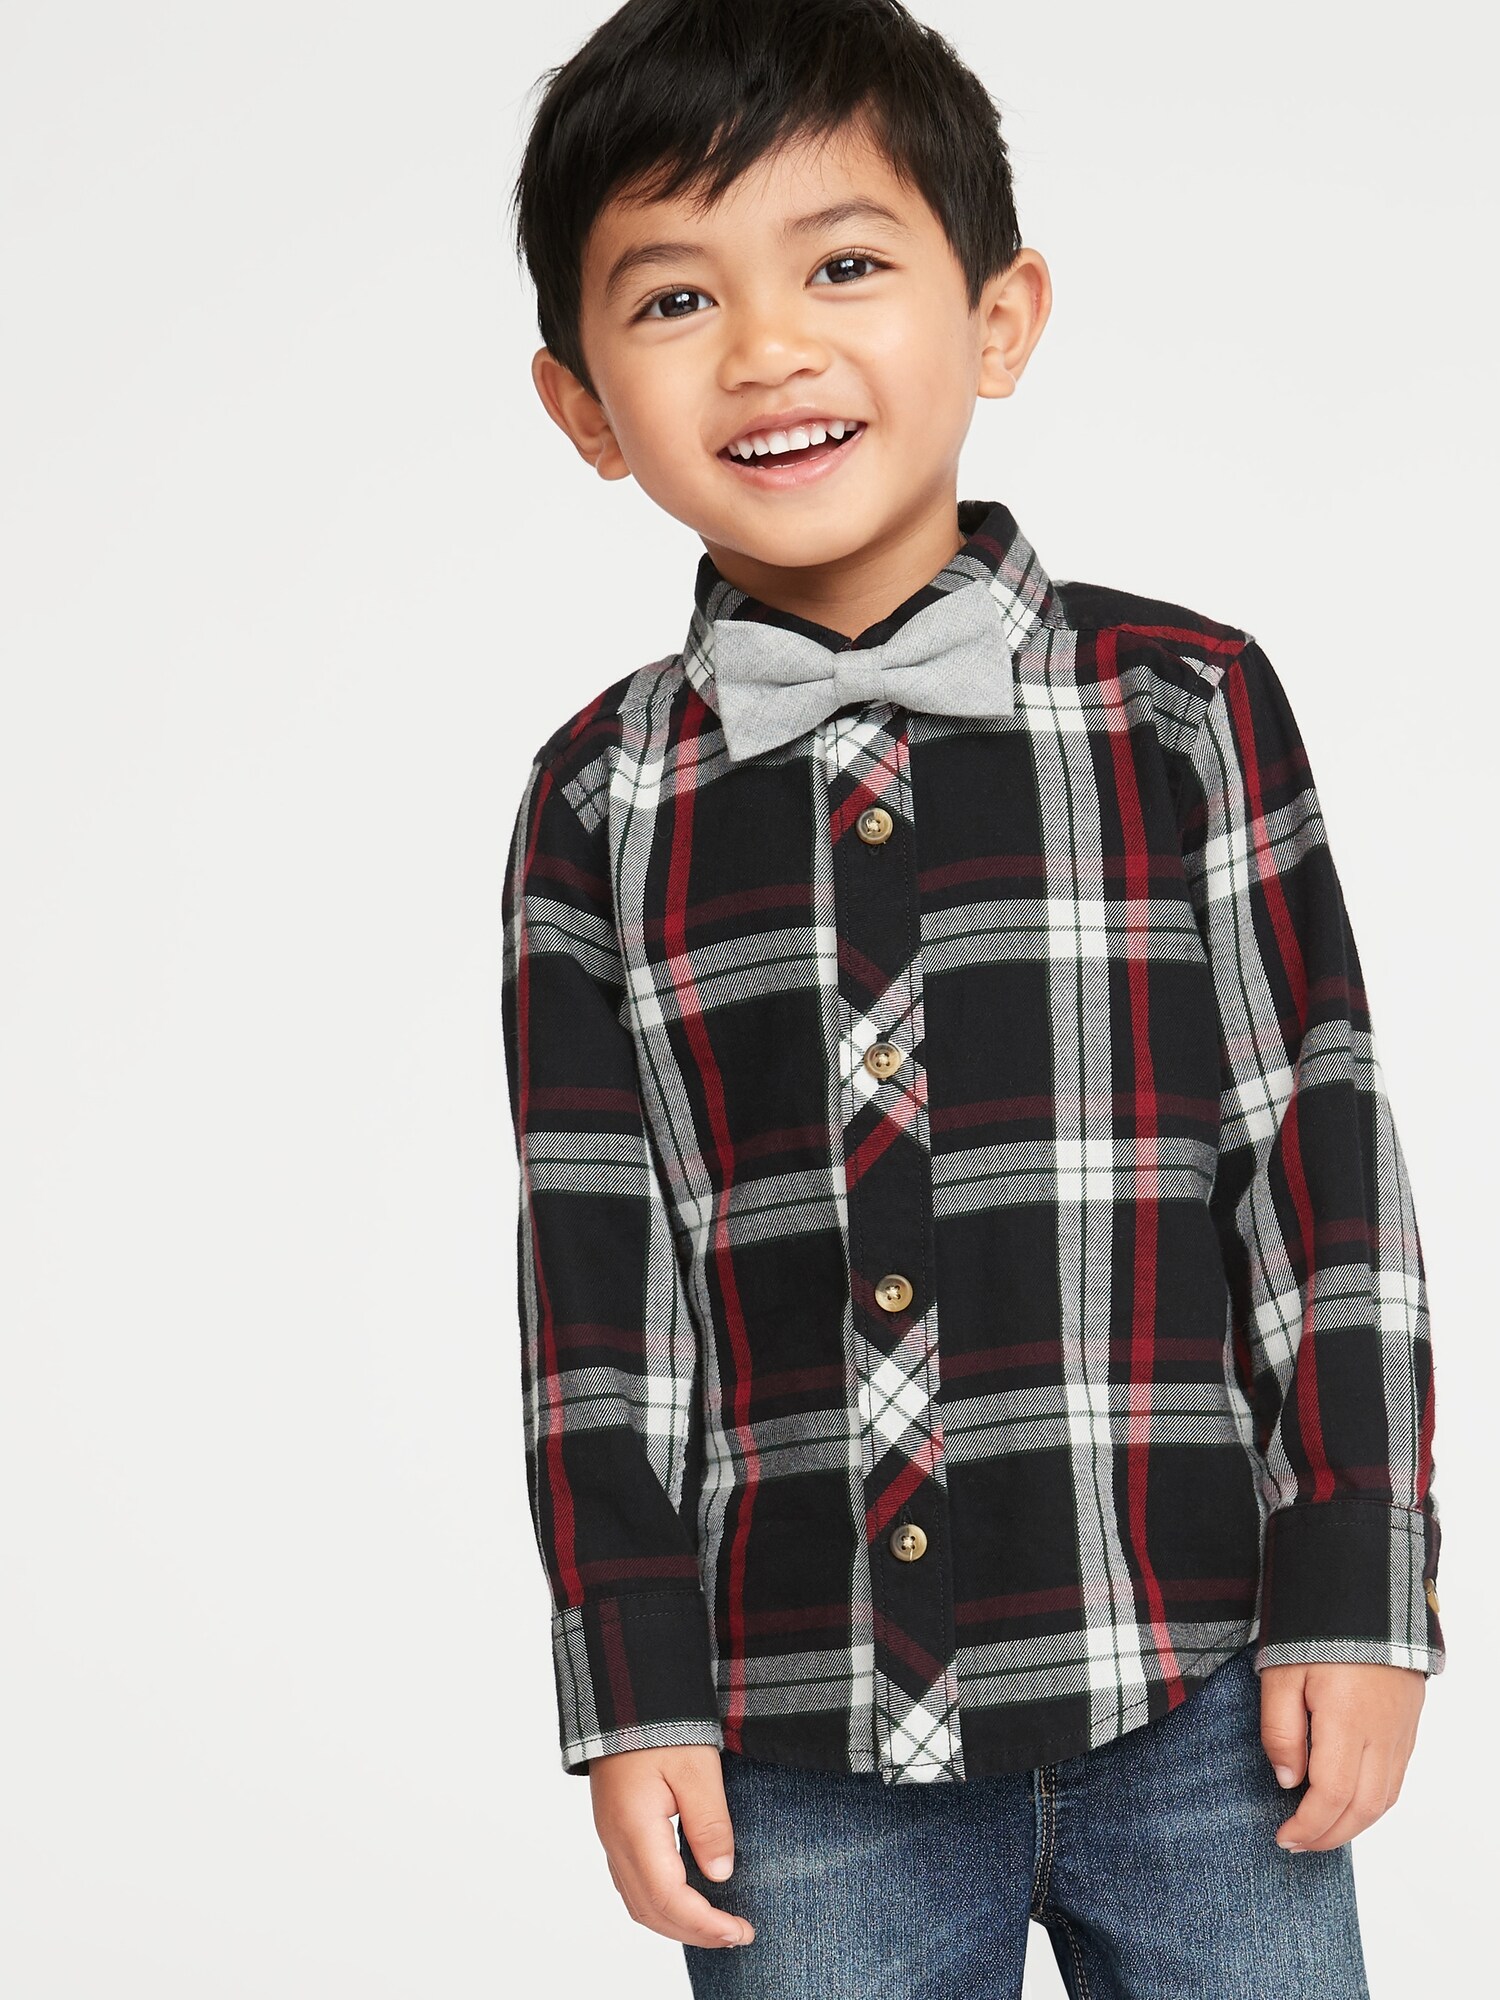 Dressy Shirt & Bow-Tie Set for Toddler Boys | Old Navy